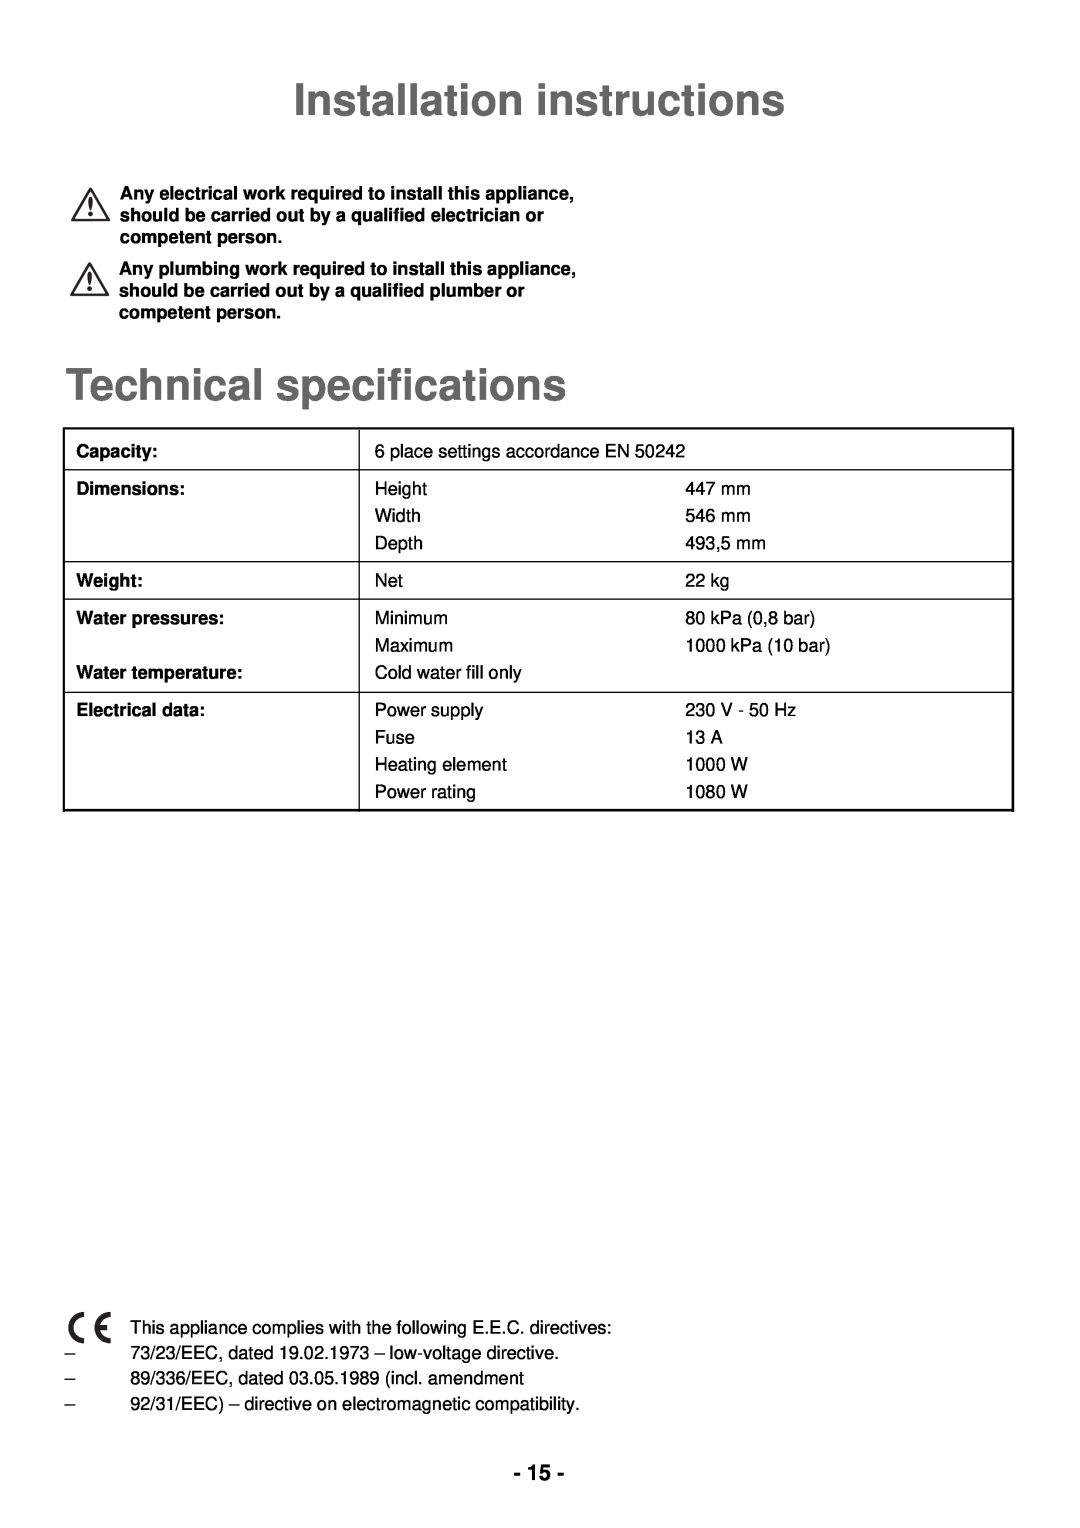 Electrolux ESL 2435 Installation instructions, Technical speciﬁcations, Capacity, Dimensions, Weight, Water pressures 